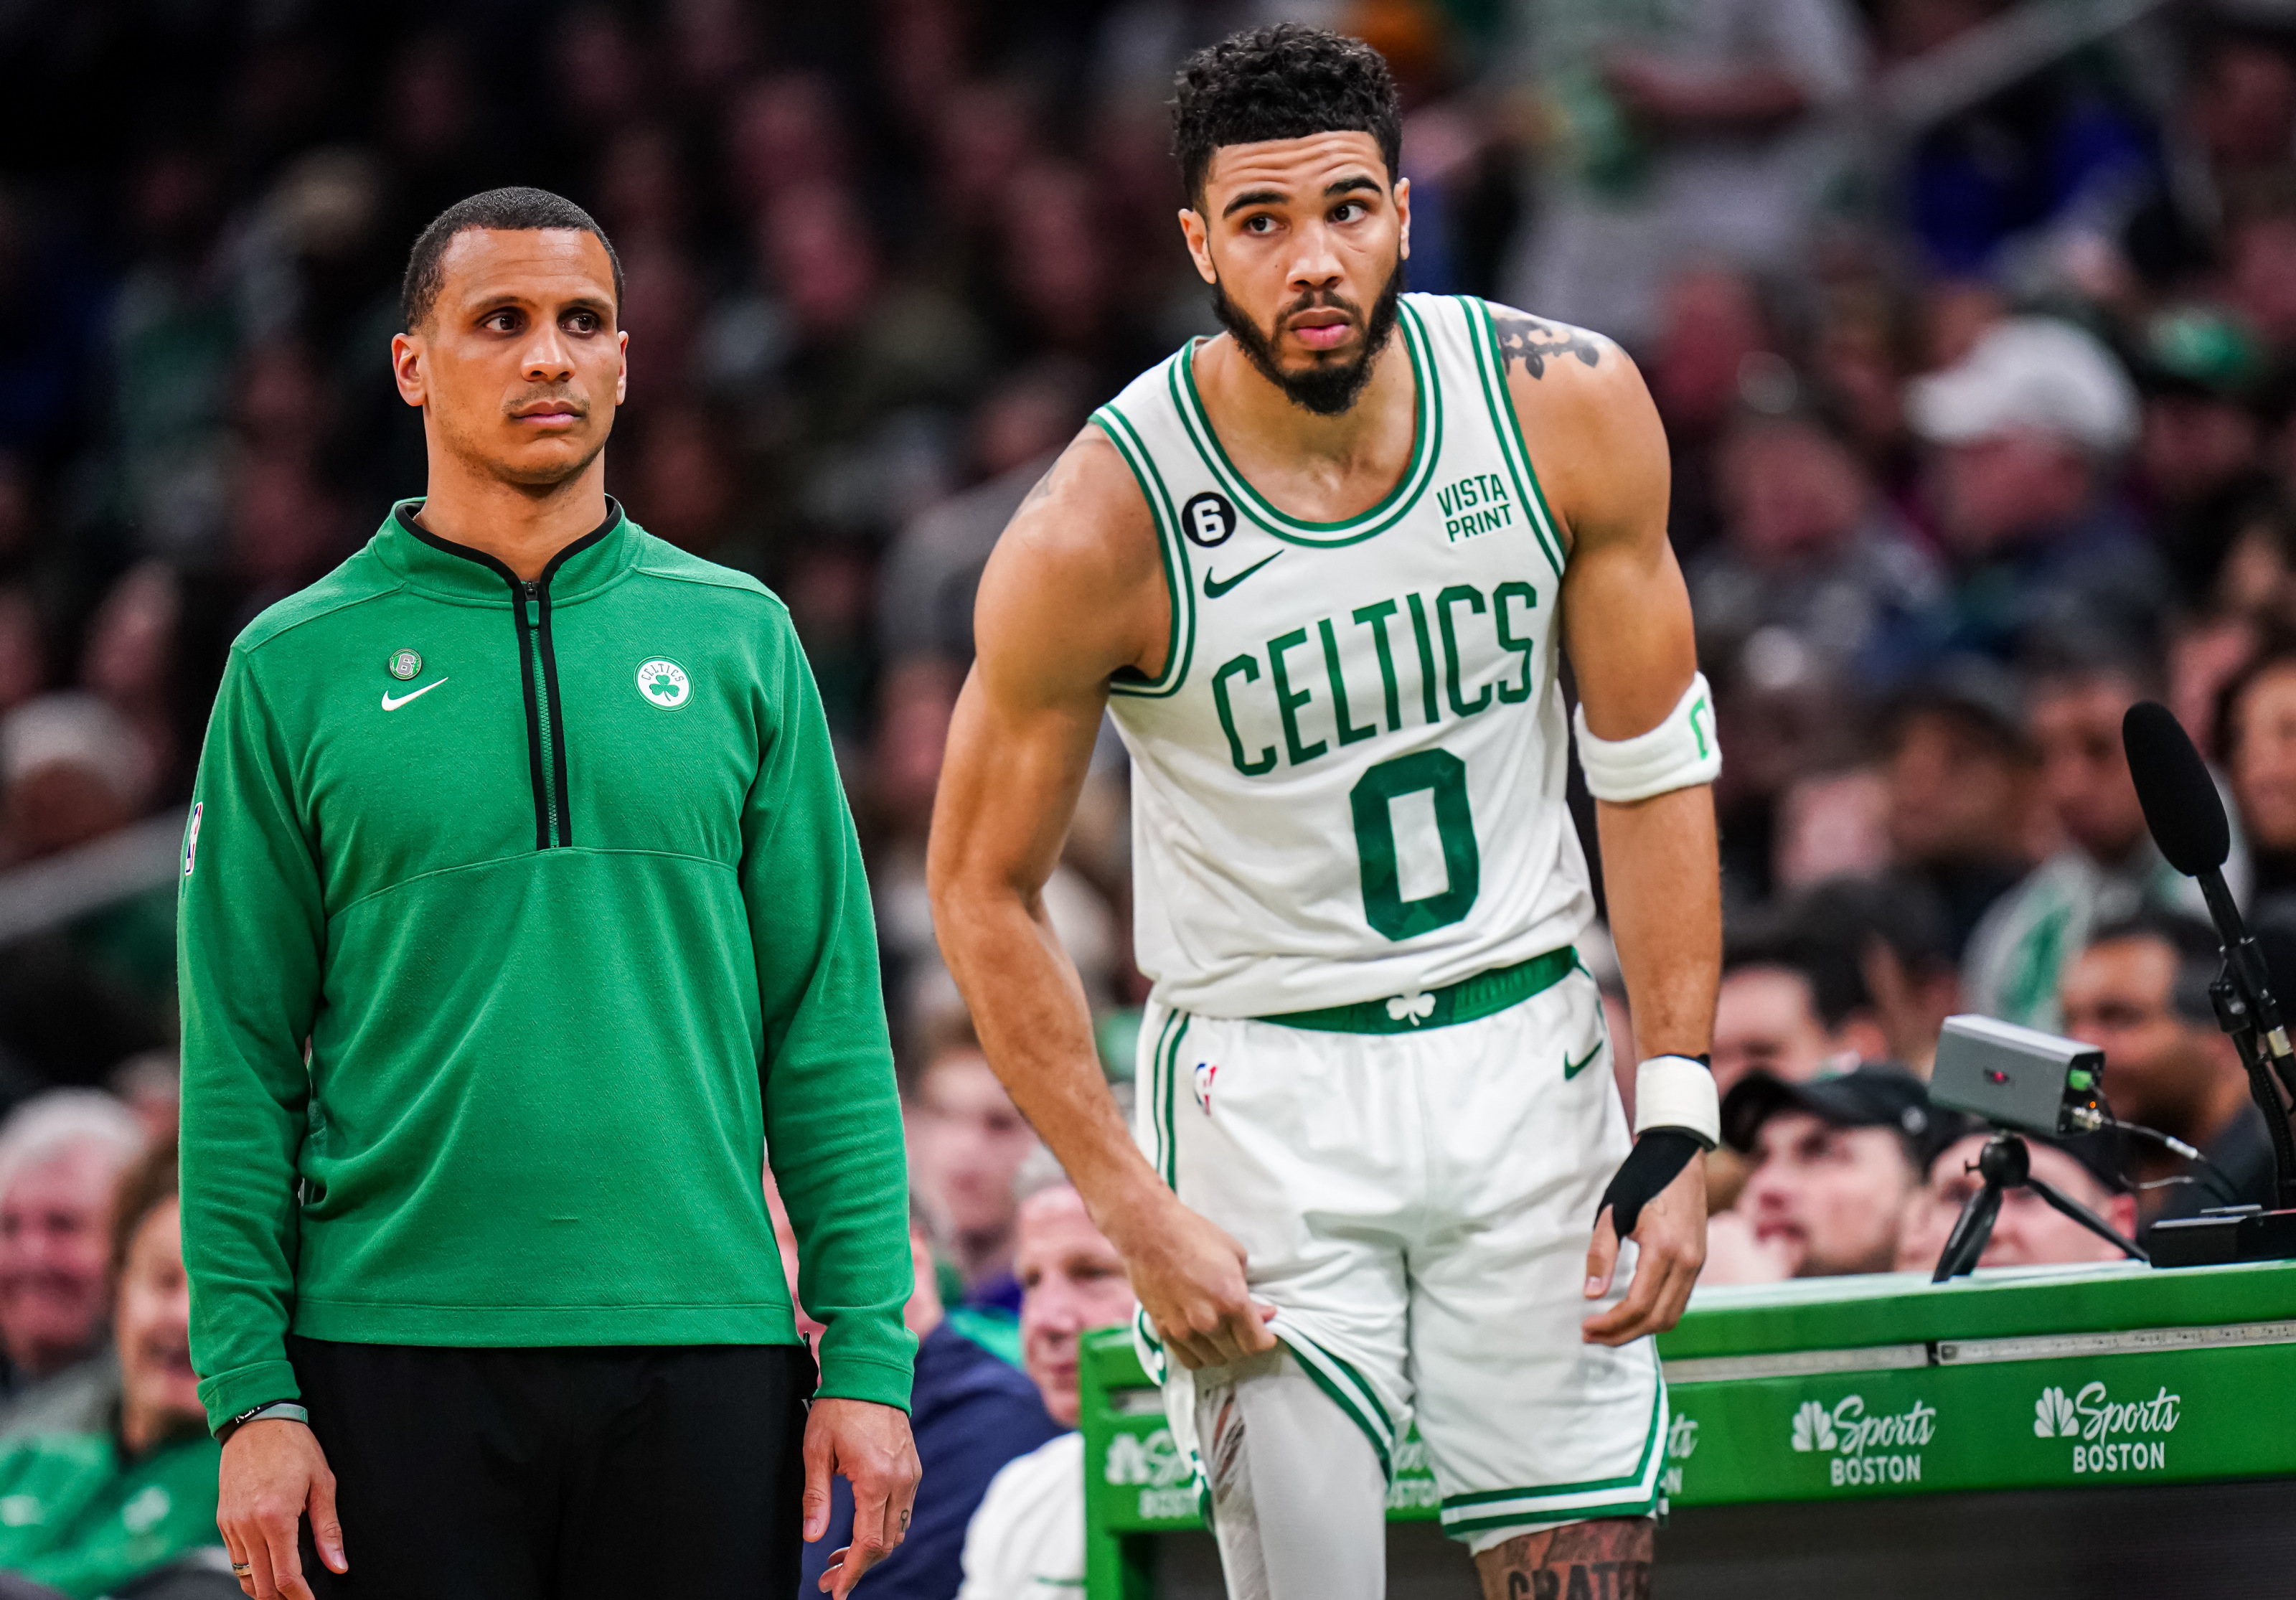 Who the Boston Celtics could play if the playoffs started today